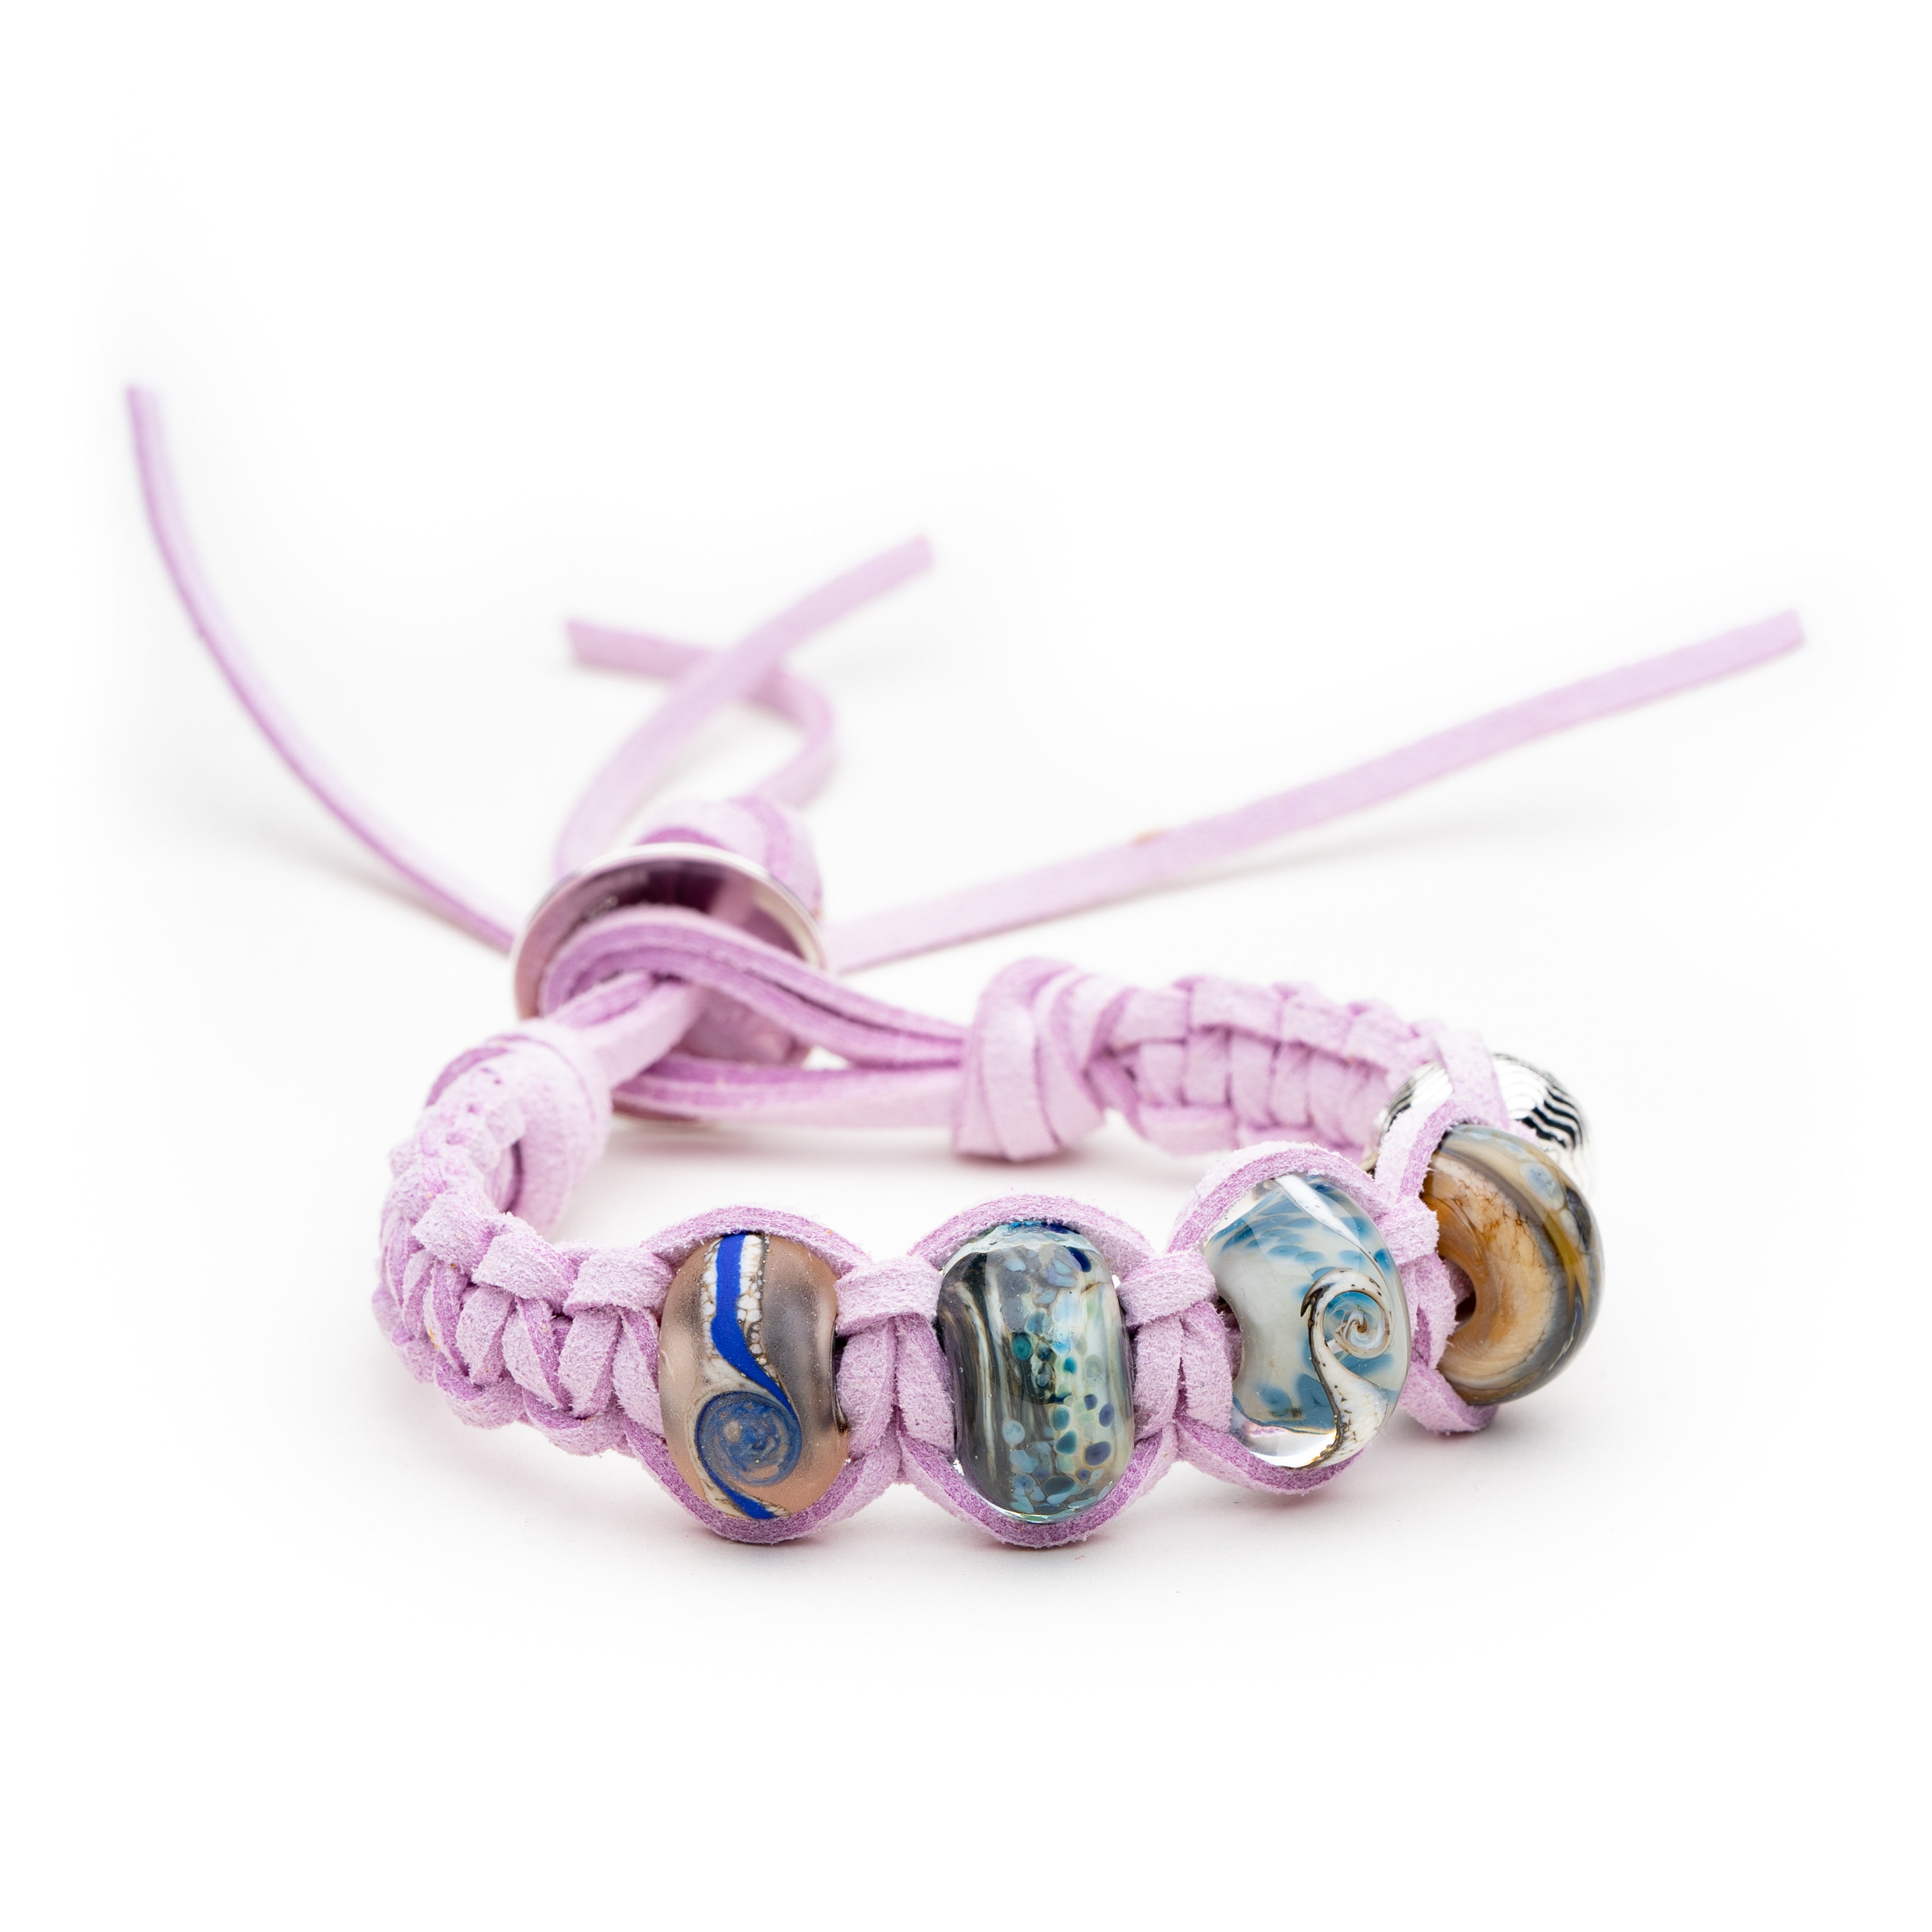 Blue glass beads for Northumberland beaches on lilac coloured plaited macrame style bracelet